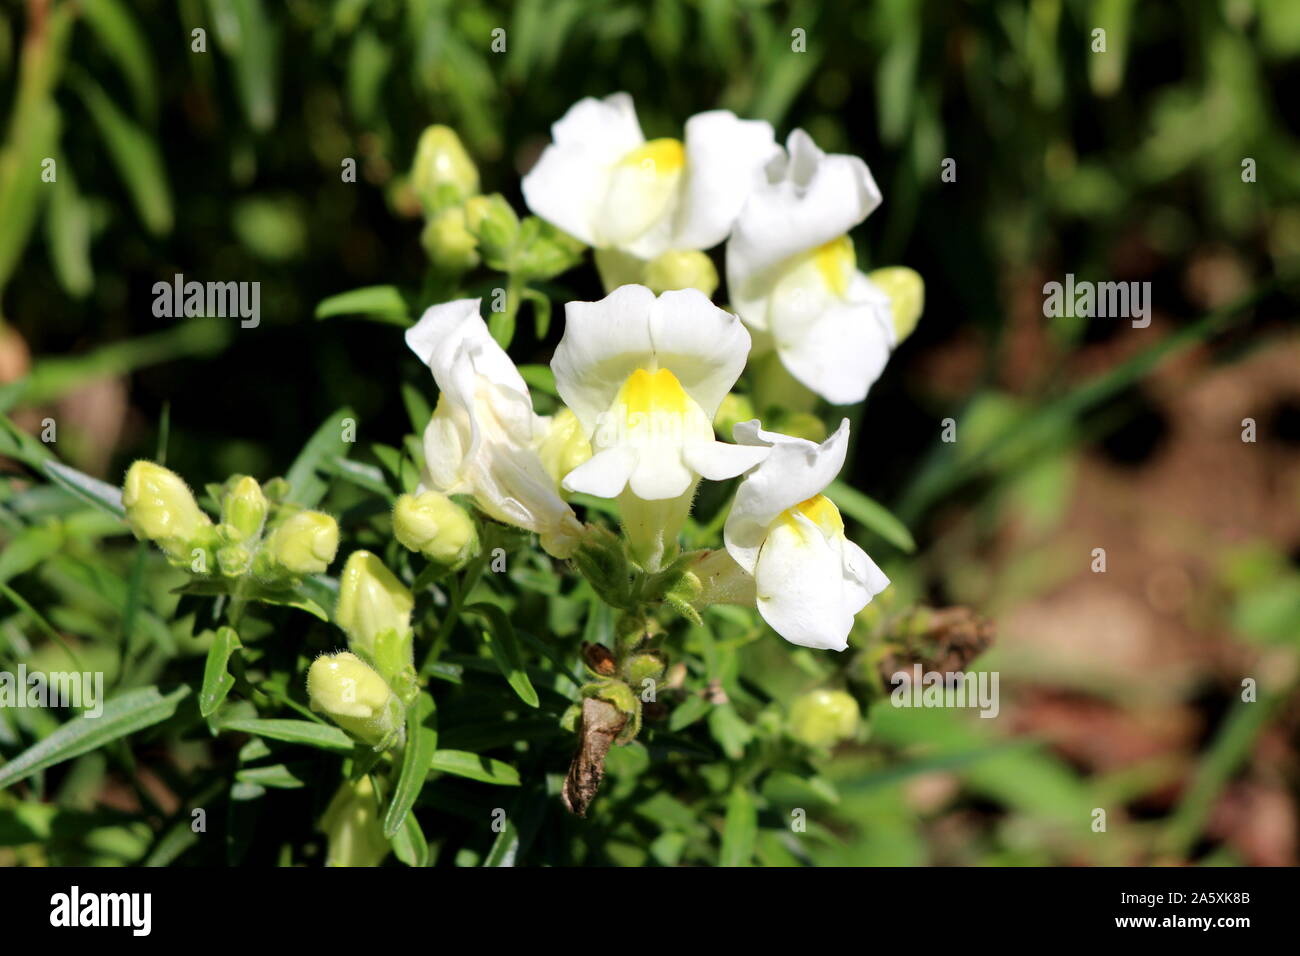 Small bunch of Common snapdragon or Antirrhinum majus herbaceous perennial plants with small flower buds and fully open blooming white flowers Stock Photo